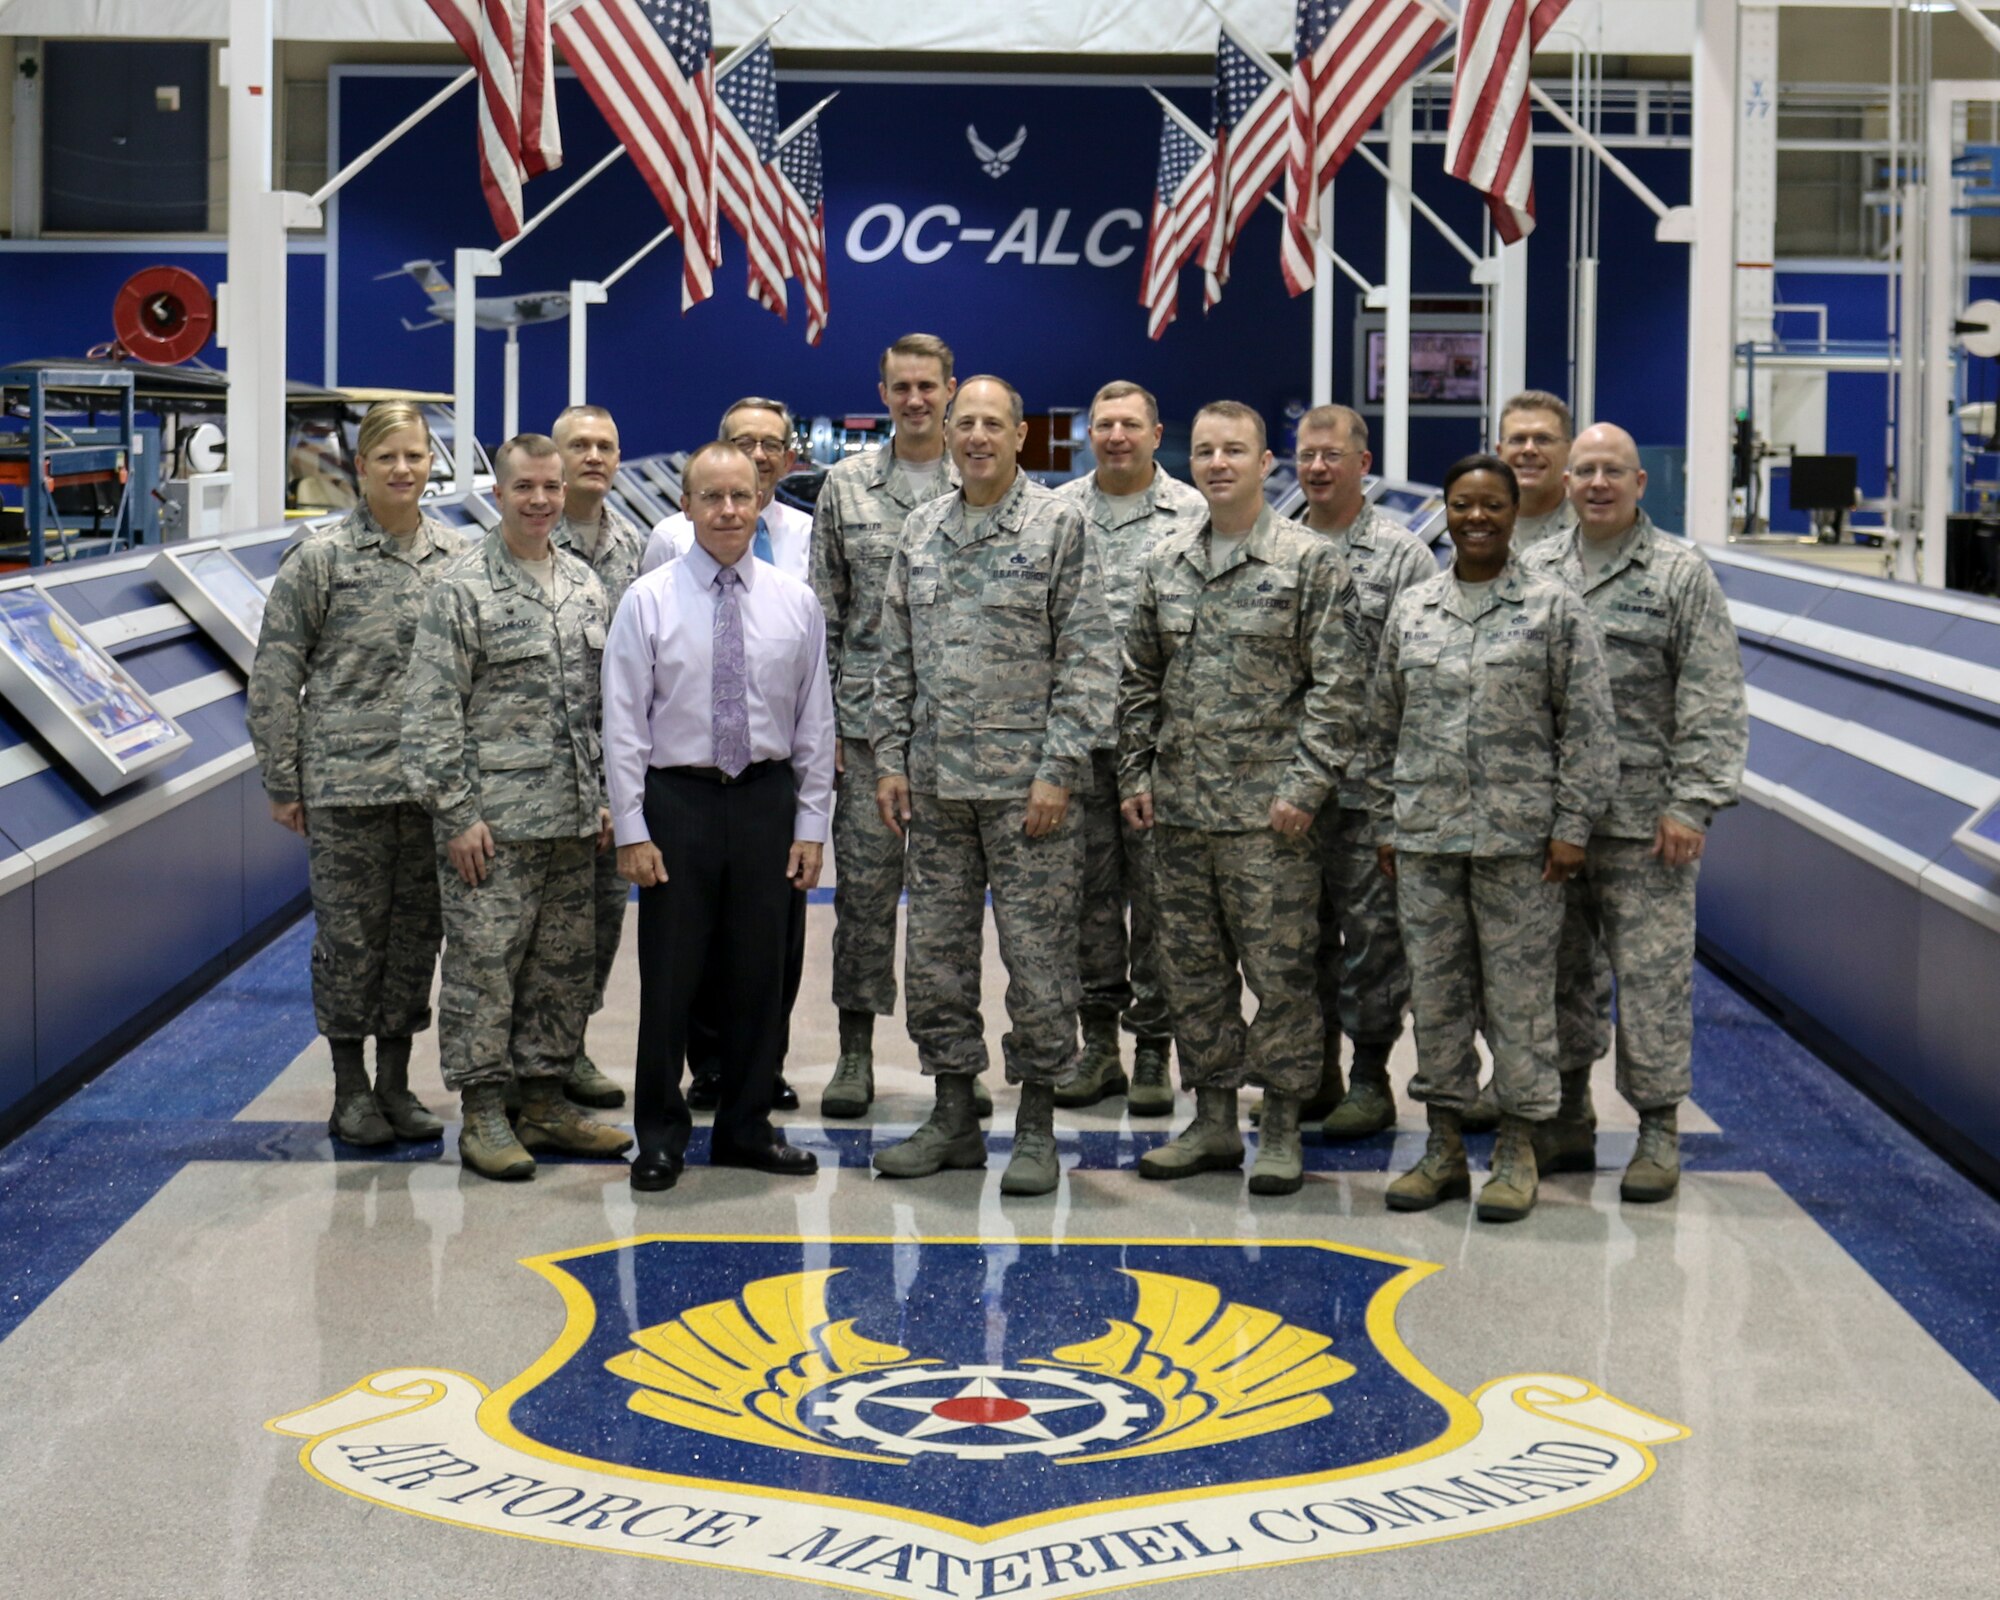 Lt. Gen. Lee K. Levy II, center, Air Force Sustainment Center Commander, is surrounded by commanders and senior leaders from across the Center brought together for a Commanders Conference Aug. 3-4 at Tinker Air Force Base, Okla. General Levy discussed and took inputs from the commanders on the AFSC Strategic Plan in a value-added environment where he said, “All the new commanders and leaders on the AFSC staff got to know each other and build a professional relationship that will pay dividends as they work together to support the mission and people of the AFSC.” Pictured are, front row from left, Col. David Sanford, commander, 635th Supply Chain Operations Wing, Scott AFB, Ill.; Mr. Jeff Allen, AFSC executive director; General Levy; Chief Master Sgt. Gary Sharp, AFSC command chief master sergeant; and Col. Stephanie Wilson, commander, 72nd Air Base Wing. Back row, from left, Col. Jennifer Hammerstedt, commander, 75th Air Base Wing, Hill AFB, Utah; Brig. Gen. Walter Lindsley, former commander, Warner Robins Air Logistics Complex; Mr. Frank Washburn, director, 448th Supply Chain Management Wing; Brig. Gen. Tom Miller, AFSC vice commander; Brig. Gen. Mark Johnson, commander, Oklahoma City Air Logistics Complex; Col. John Kubinec, WR-ALC commander; Brig. Gen. Steve Bleymaier, commander, Ogden Air Logistics Complex; and Col. Jeffrey King, commander, 78th Air Base Wing, Robins AFB, Ga. (U.S. Air Force photo/Abraham Martinez)